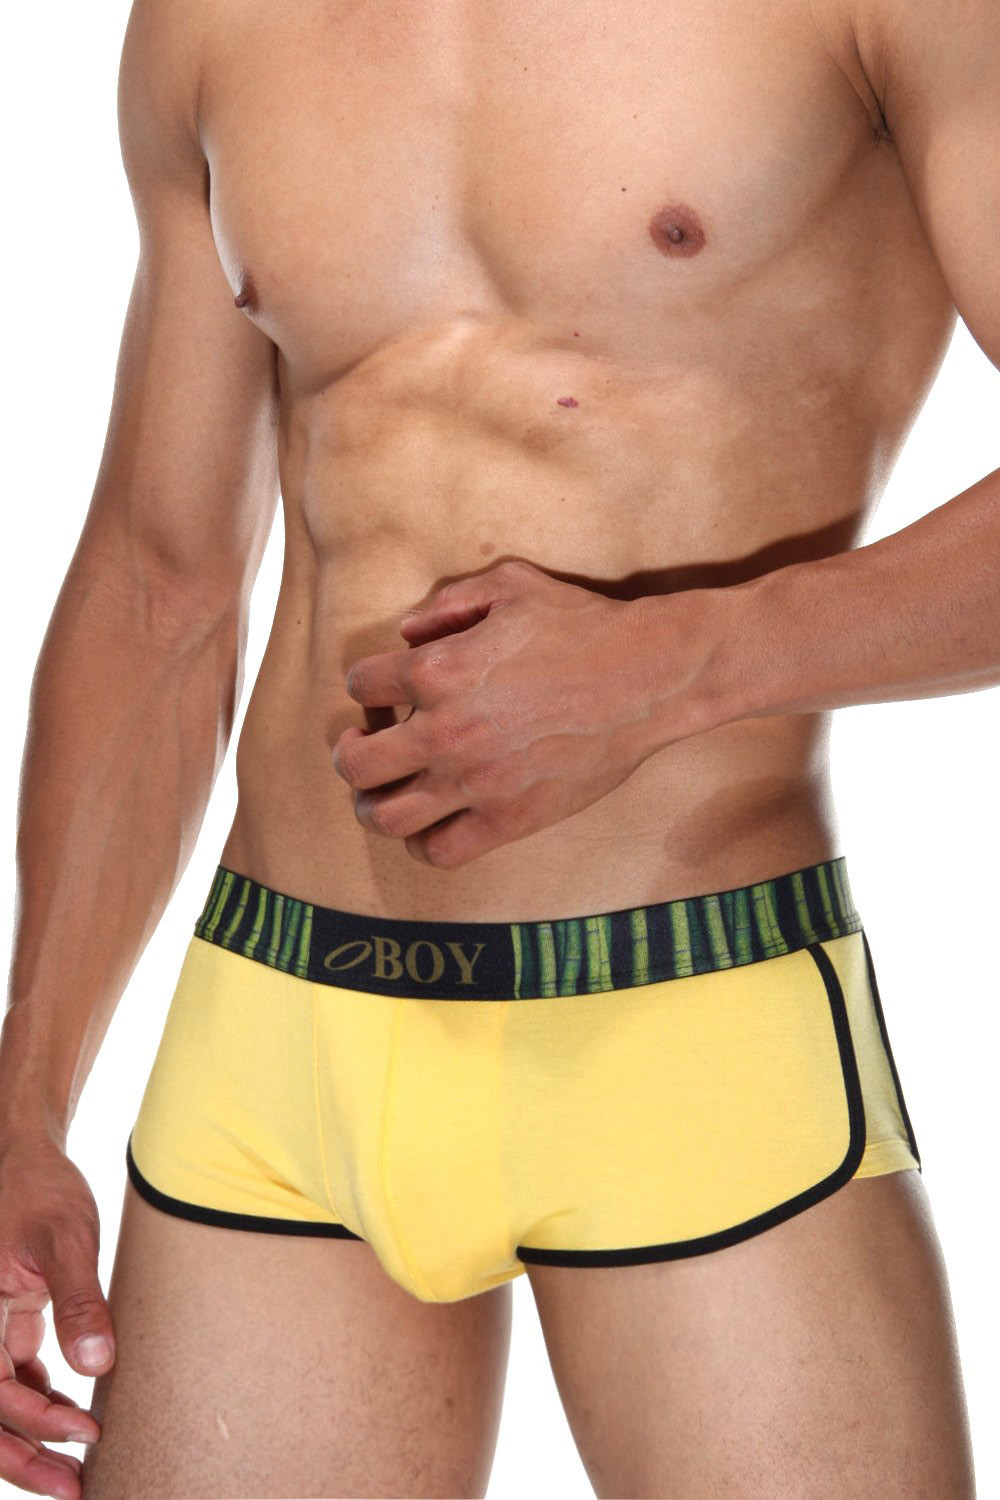 OBOY BAMBOO sprinter trunks at oboy.com